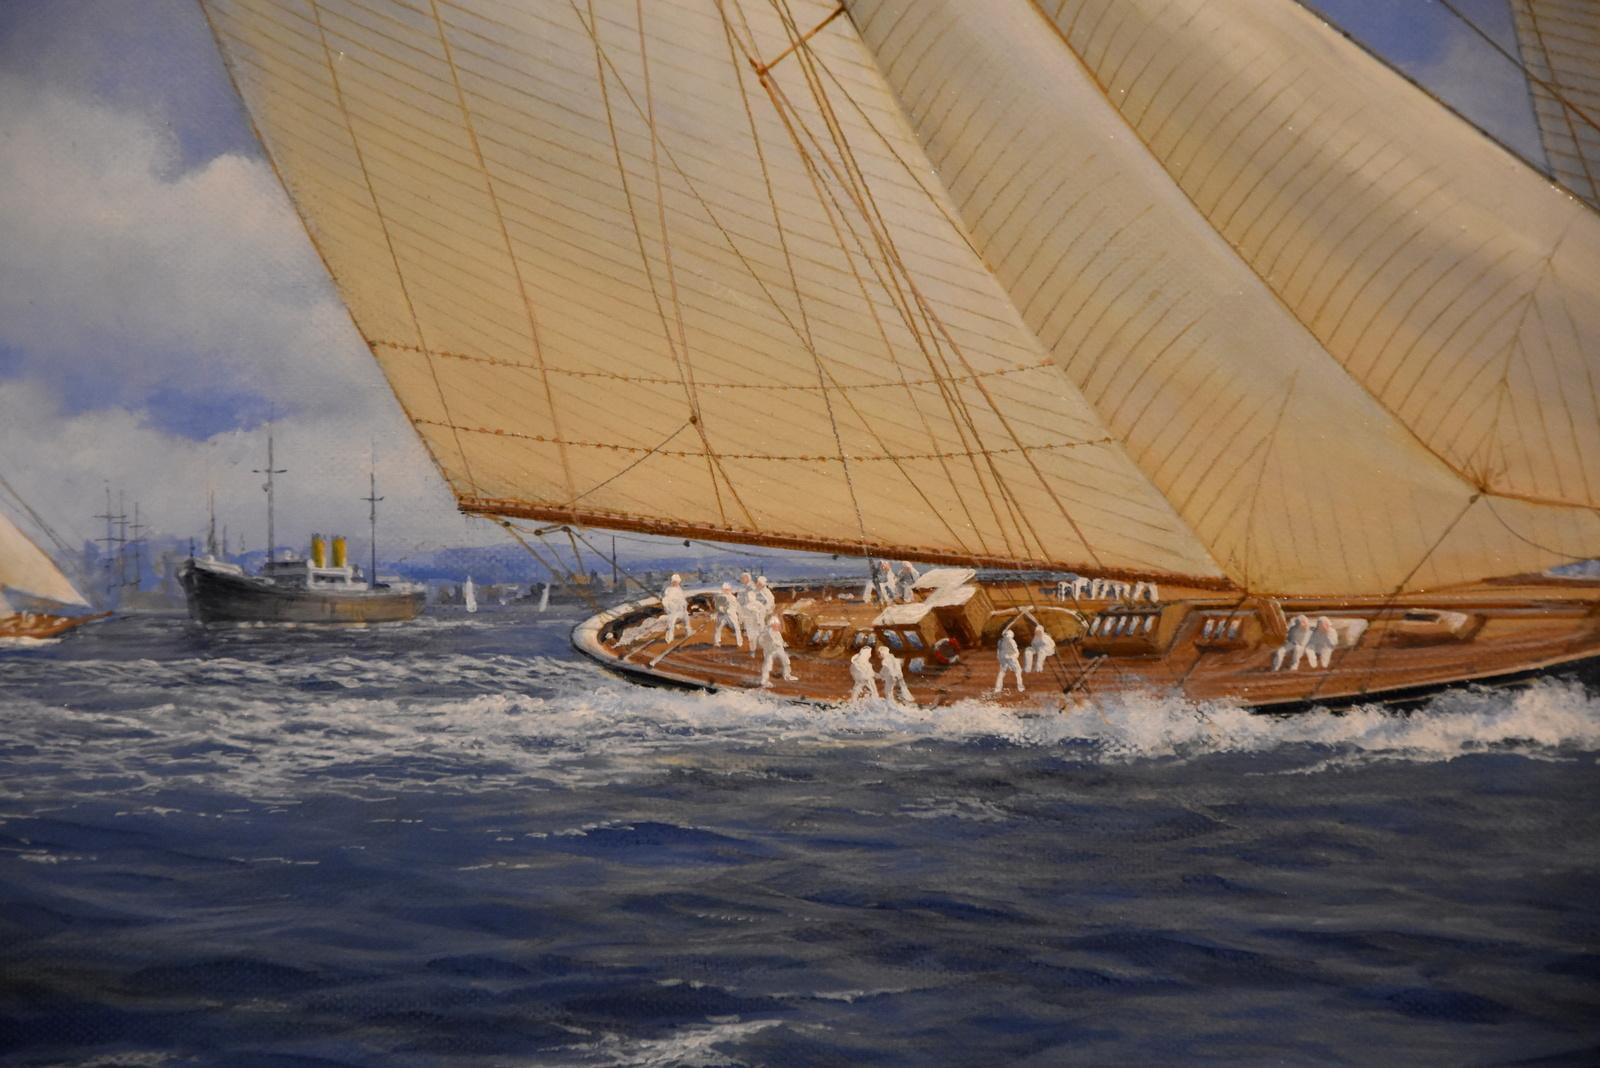 “Britannia Racing Lulworth” by John J Holmes. John Holmes was born in 1938 and became a fine painter of Americas cup yachting views. Lived Edinburgh, Then Tynmouth. Oil on canvas. Signed and inscribed verso.

Dimensions unframed
height 24